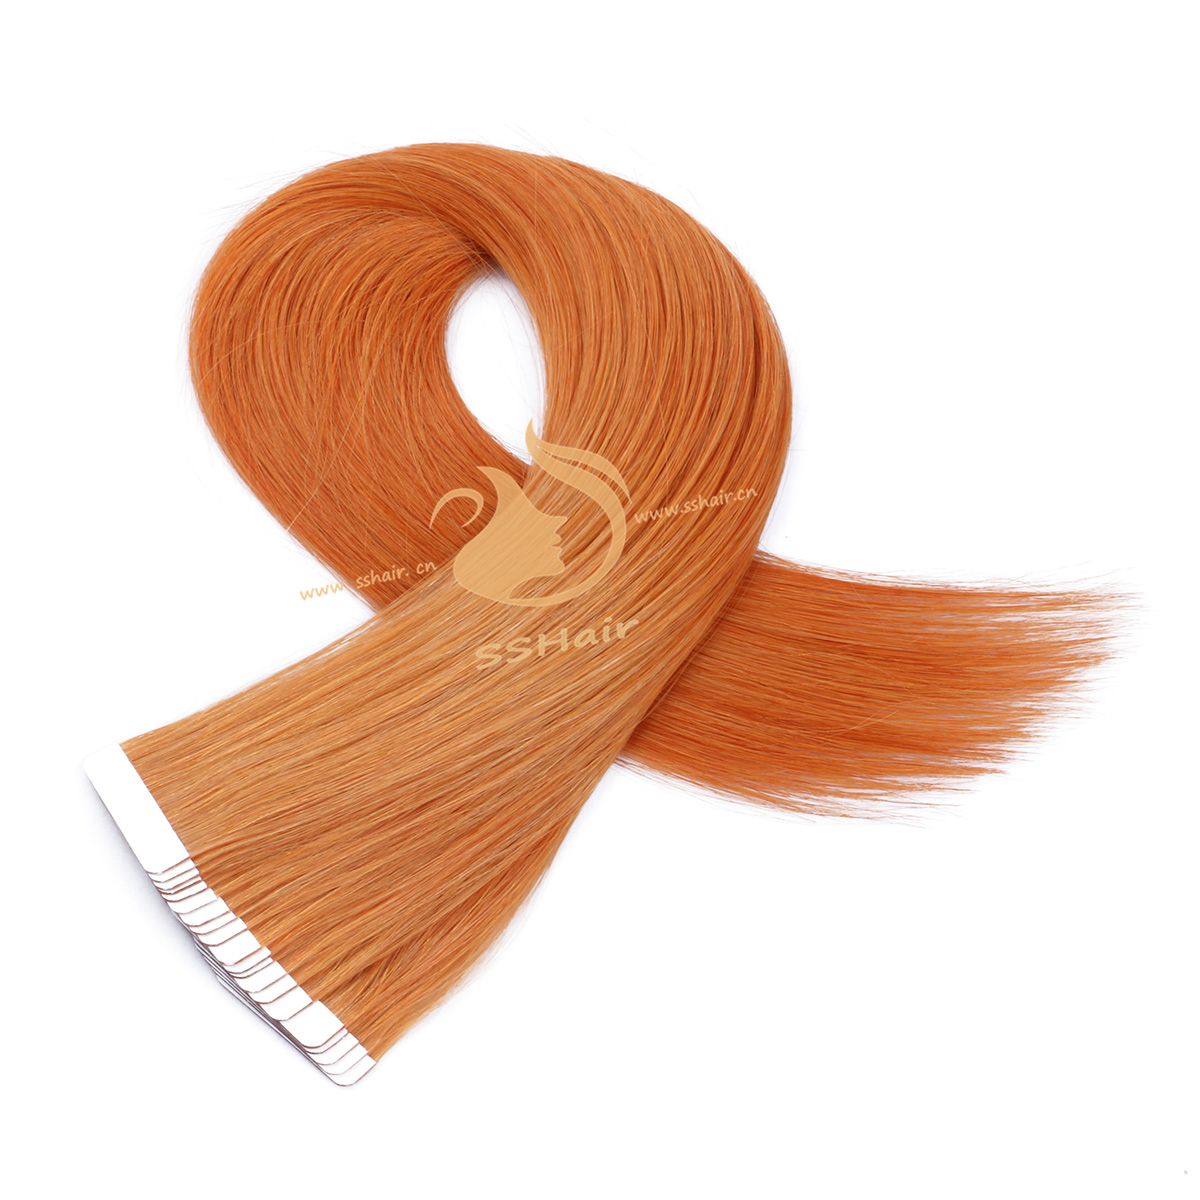 SSHair // Tape in Hair Extensions // Remy Human Hair // Orange // Straight